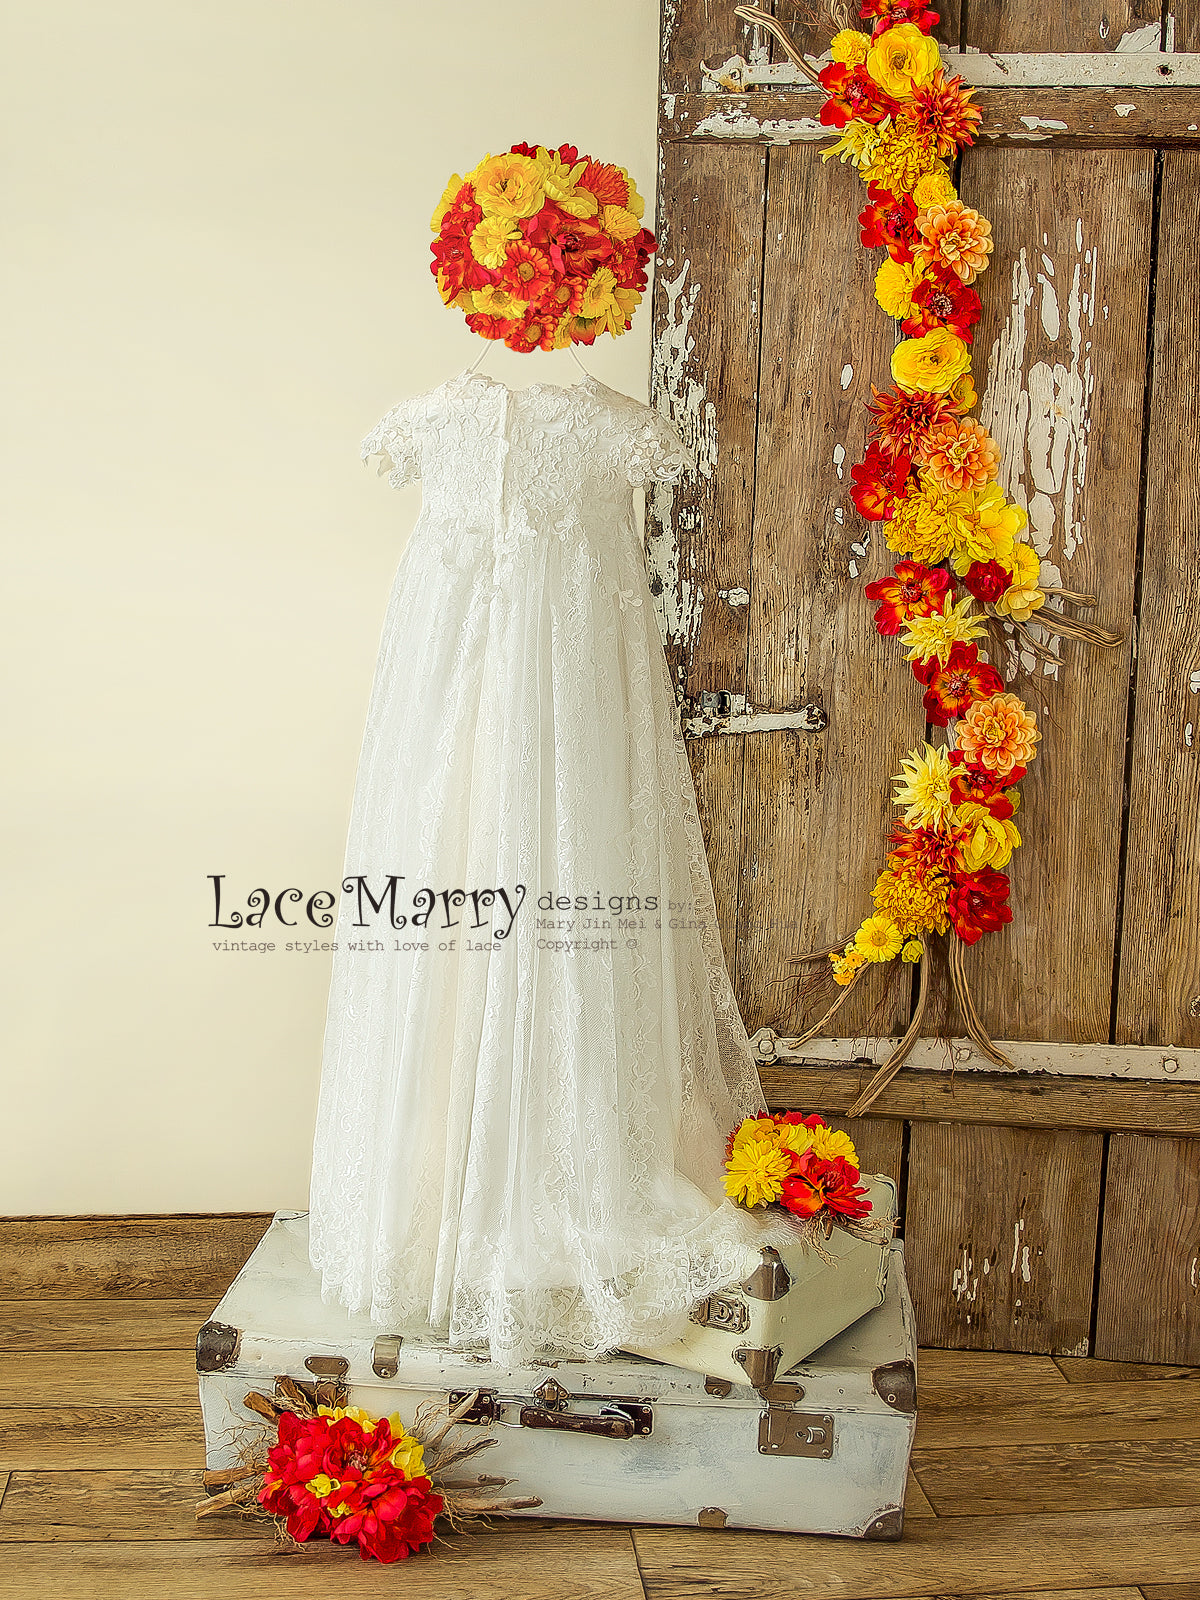 Unique Lace Flower Girl Dress with Small Sleeves